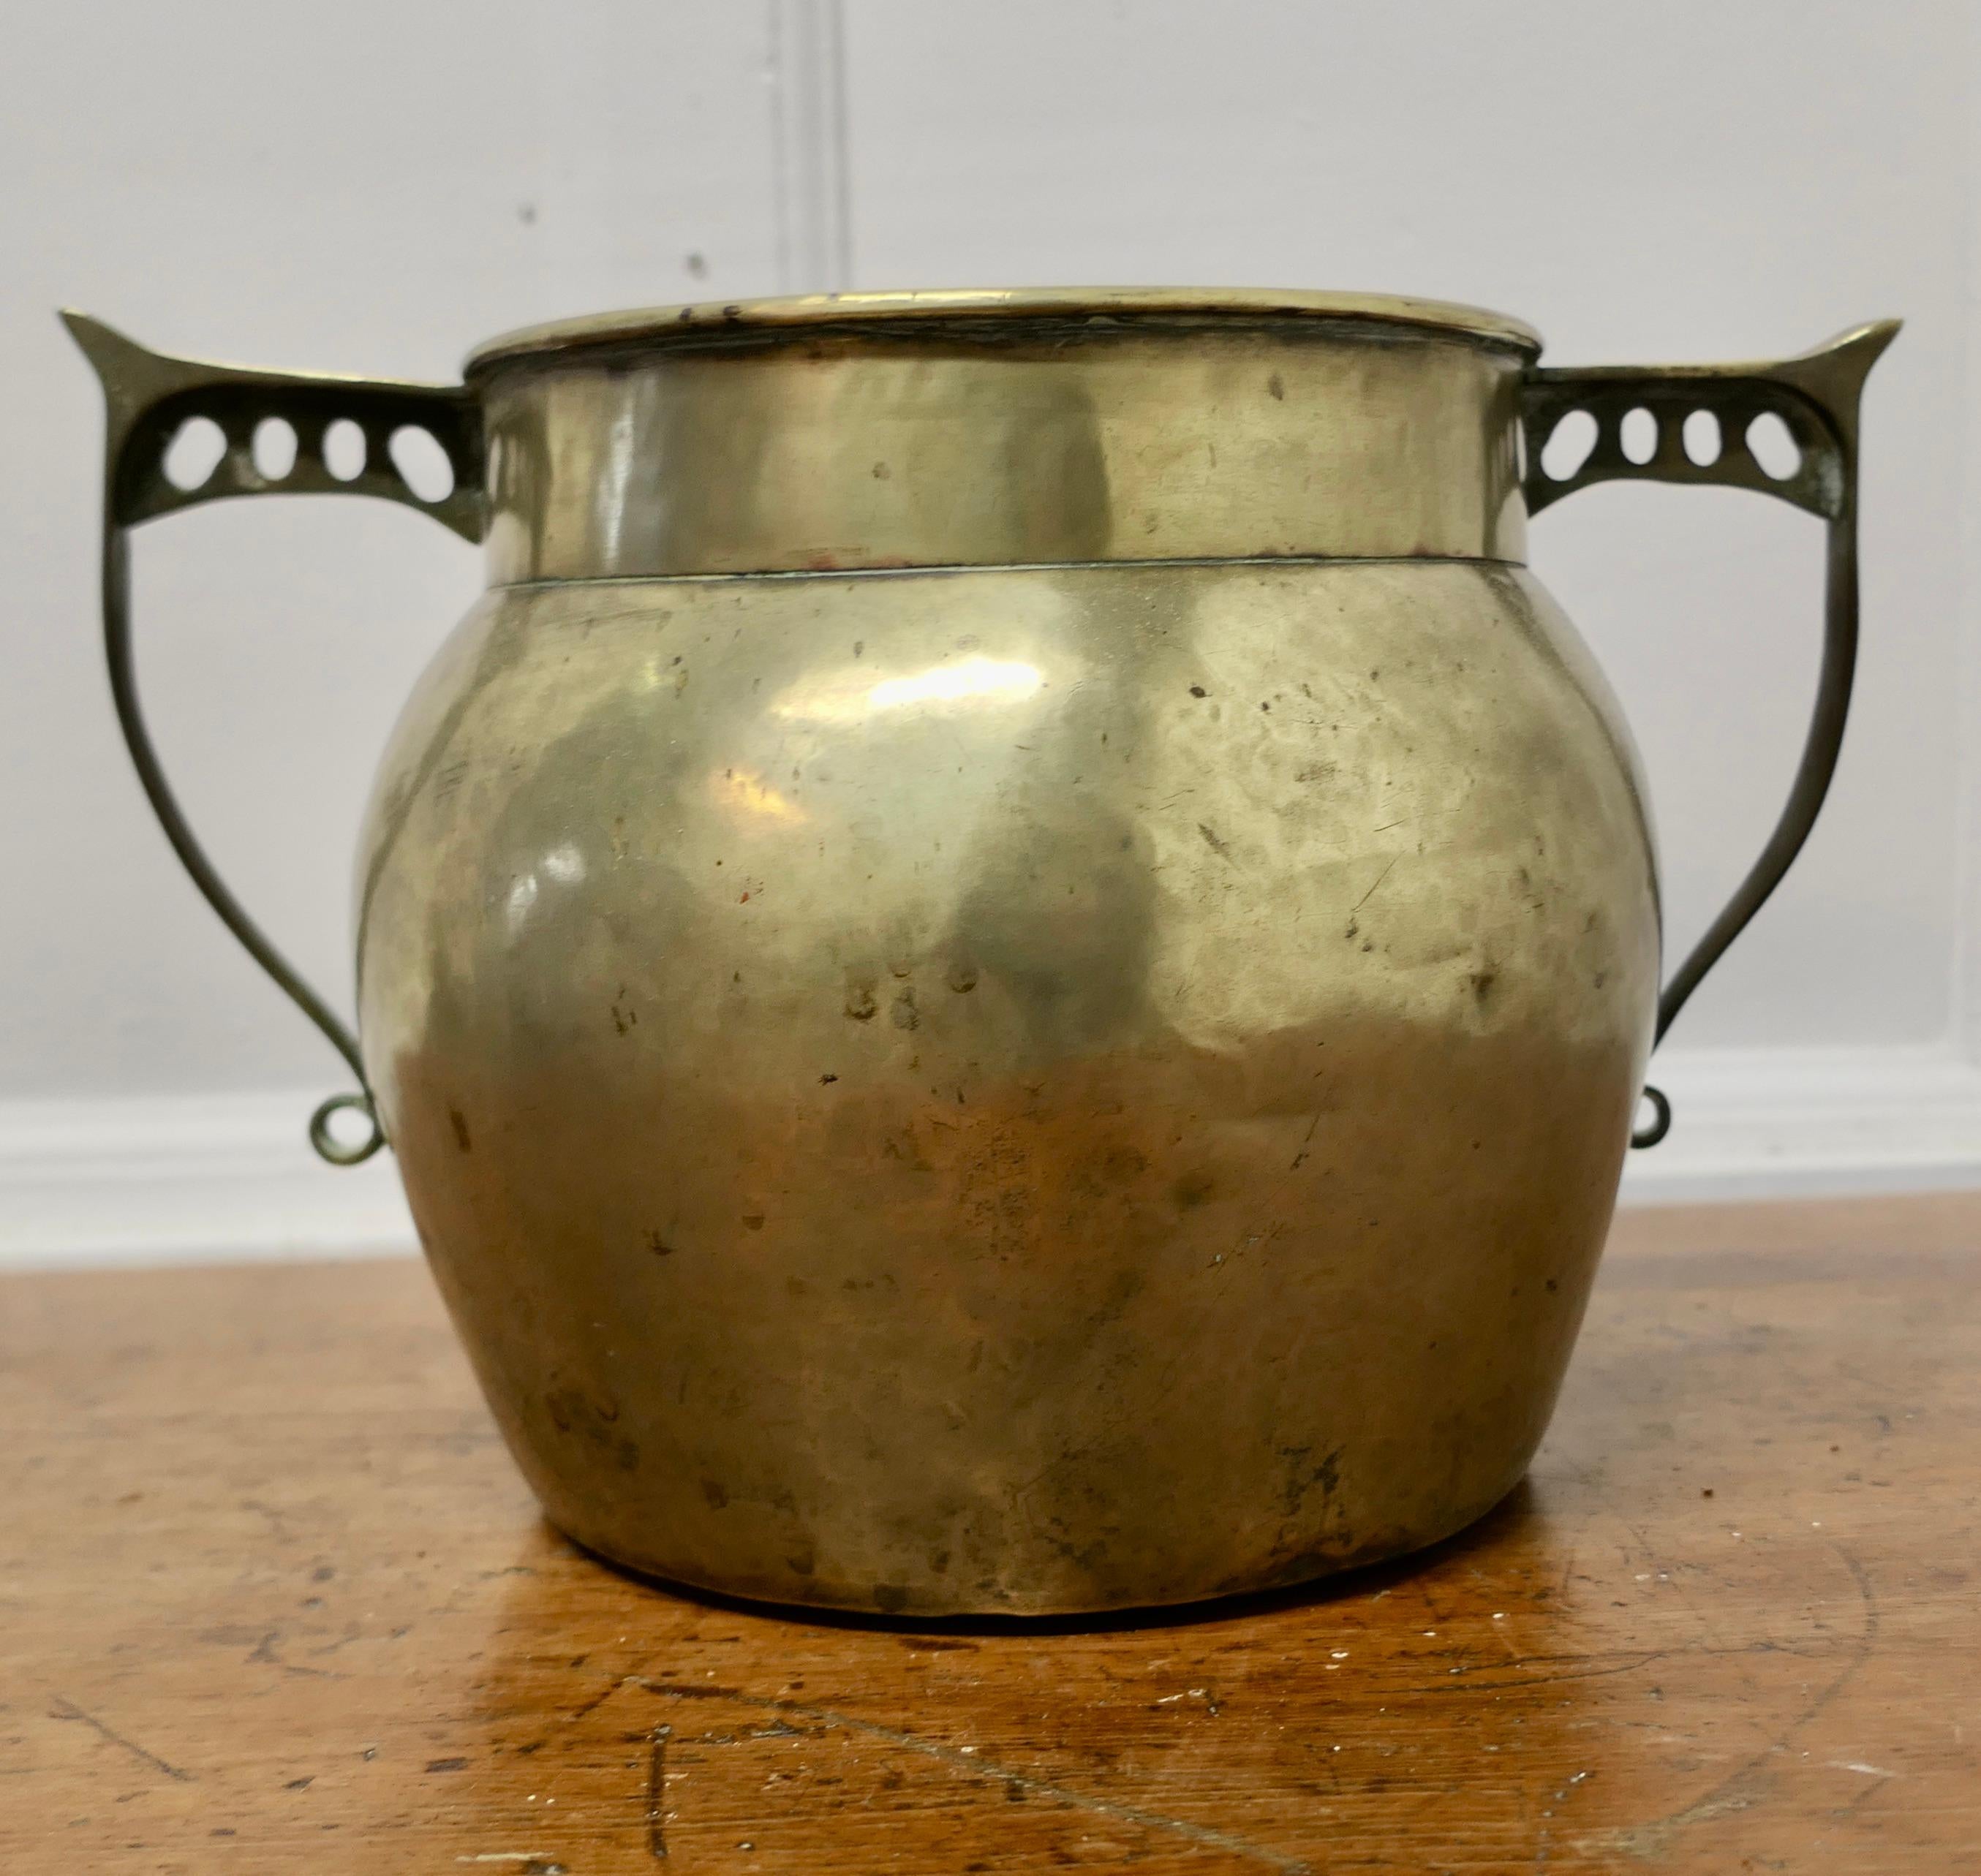 Art Nouveau Brass Planter 

This is a lovely big beaten brass pot, it has a good rounded shape with stylised handles 
The cauldron is in good well aged condition, it has been used as a planter in the past it has some water stains on the inside it is